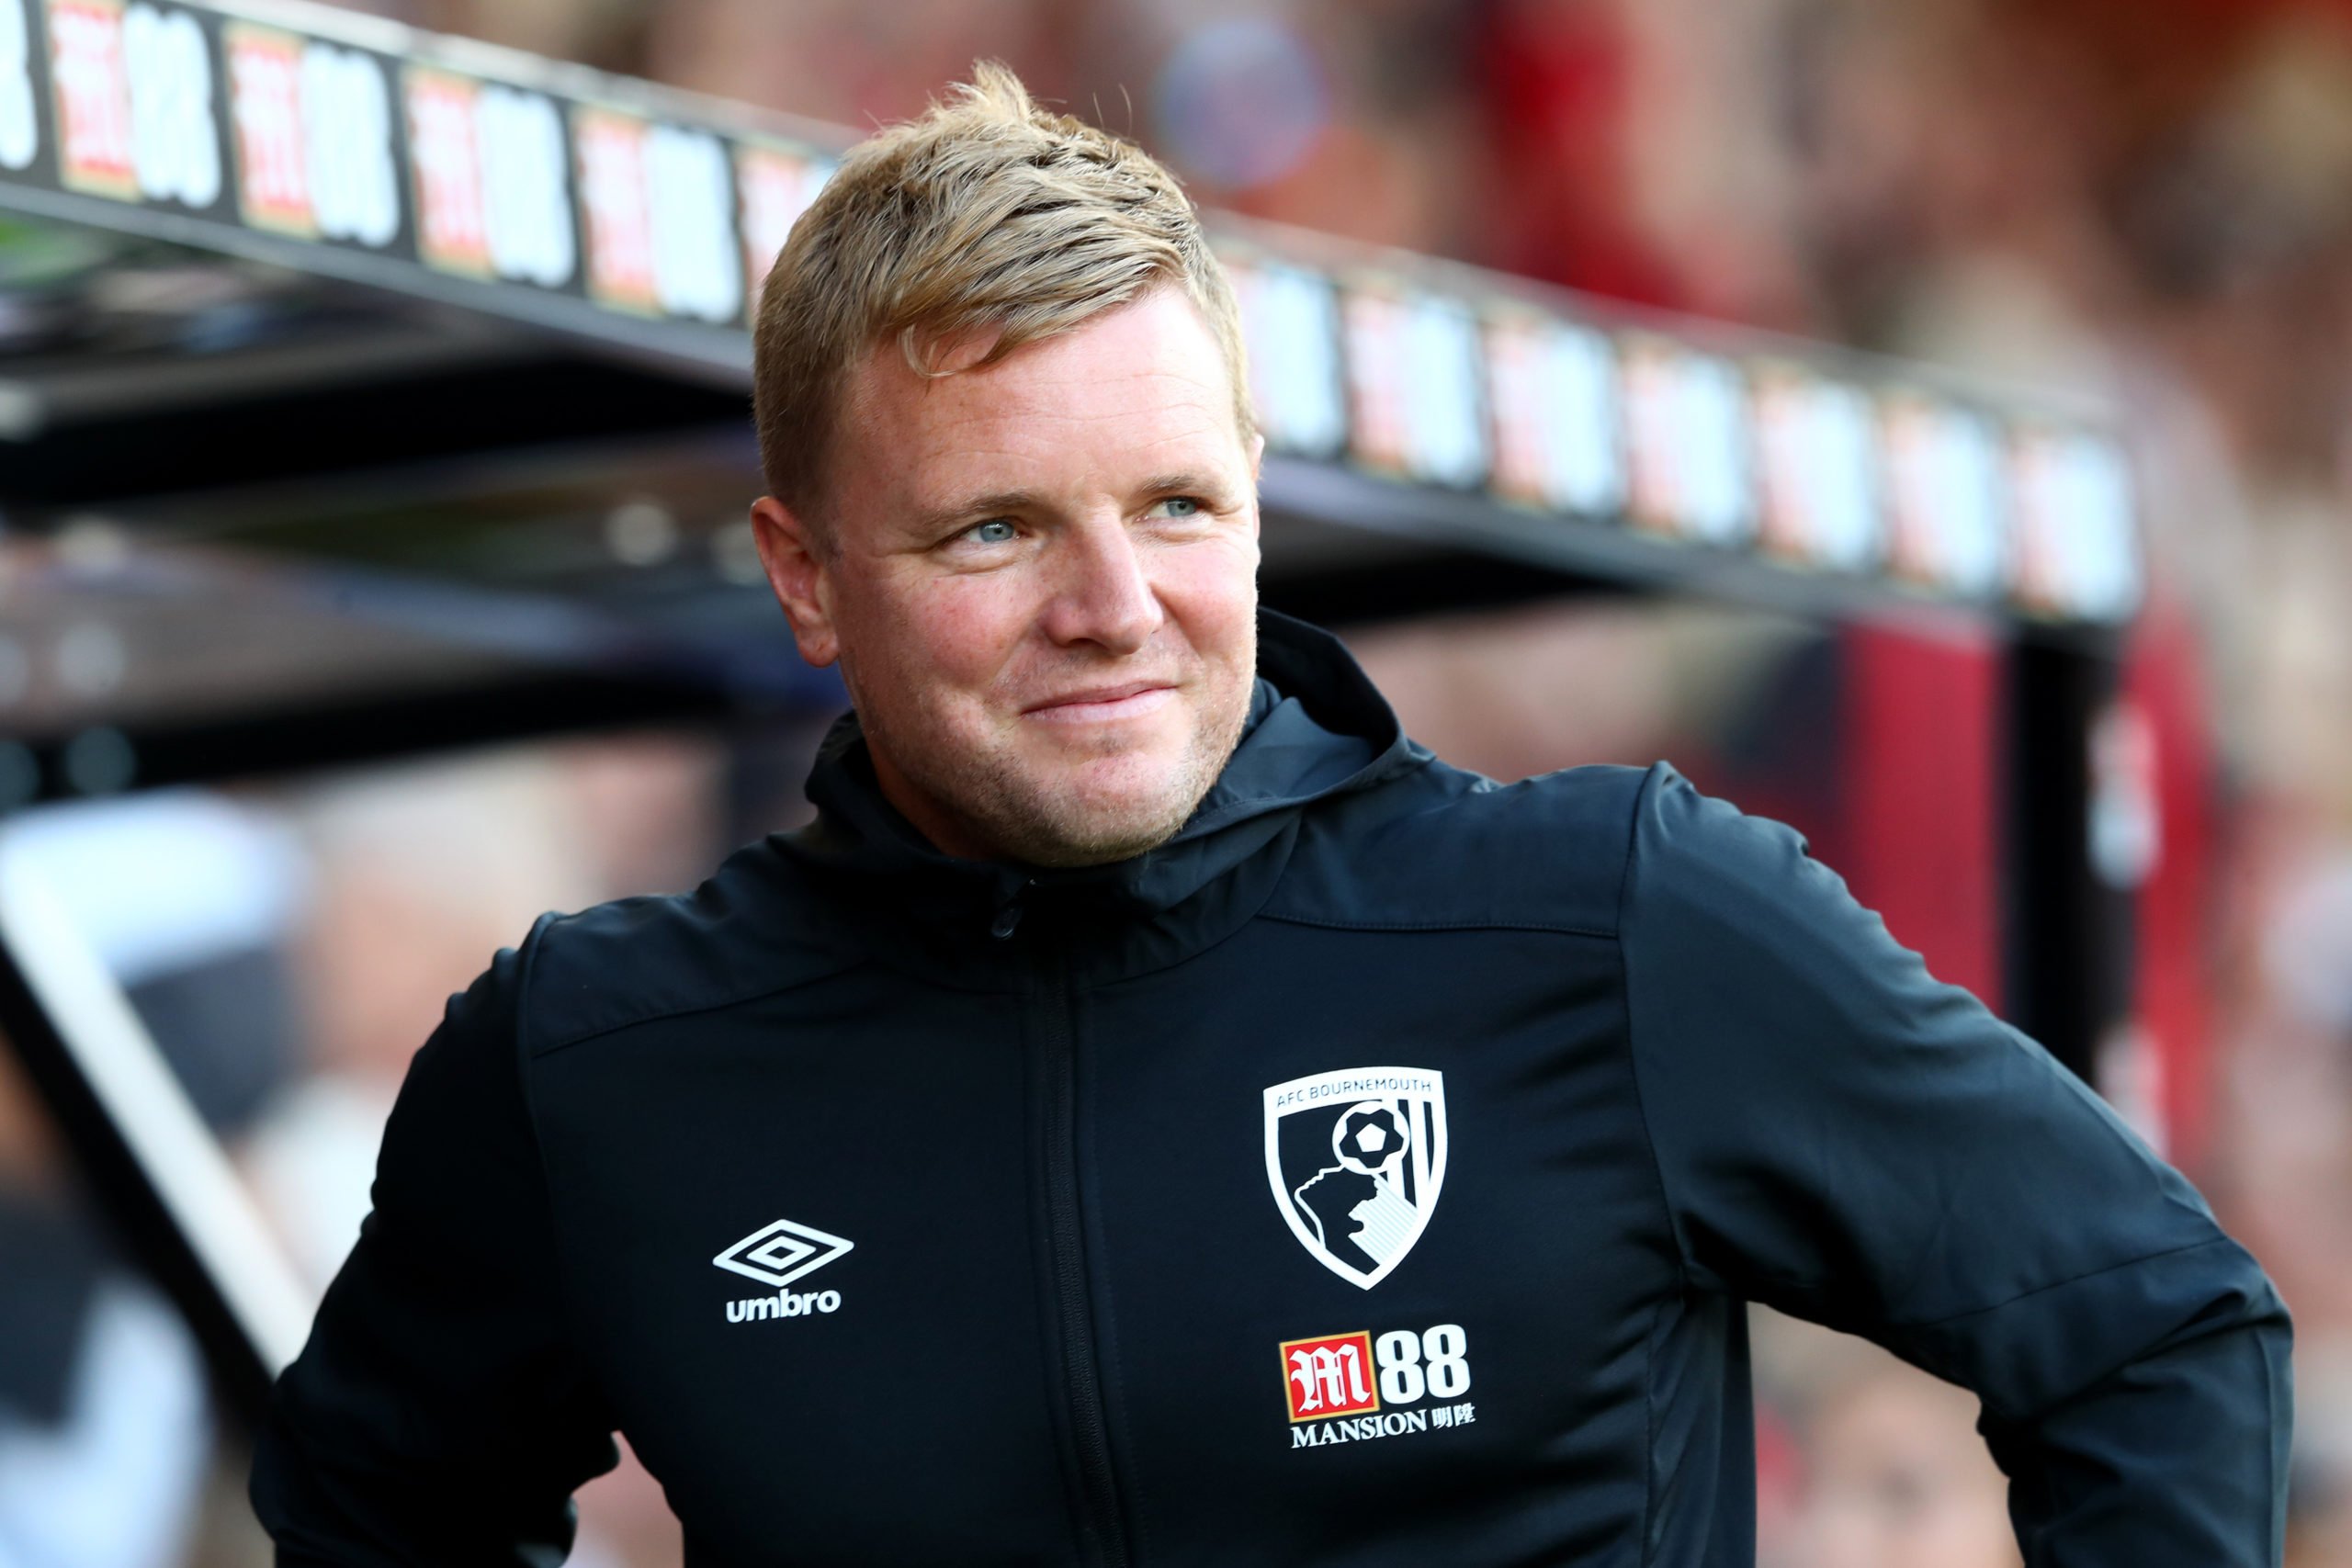 Nothing concrete yet, but Eddie Howe speculation shows who Celtic fans are after